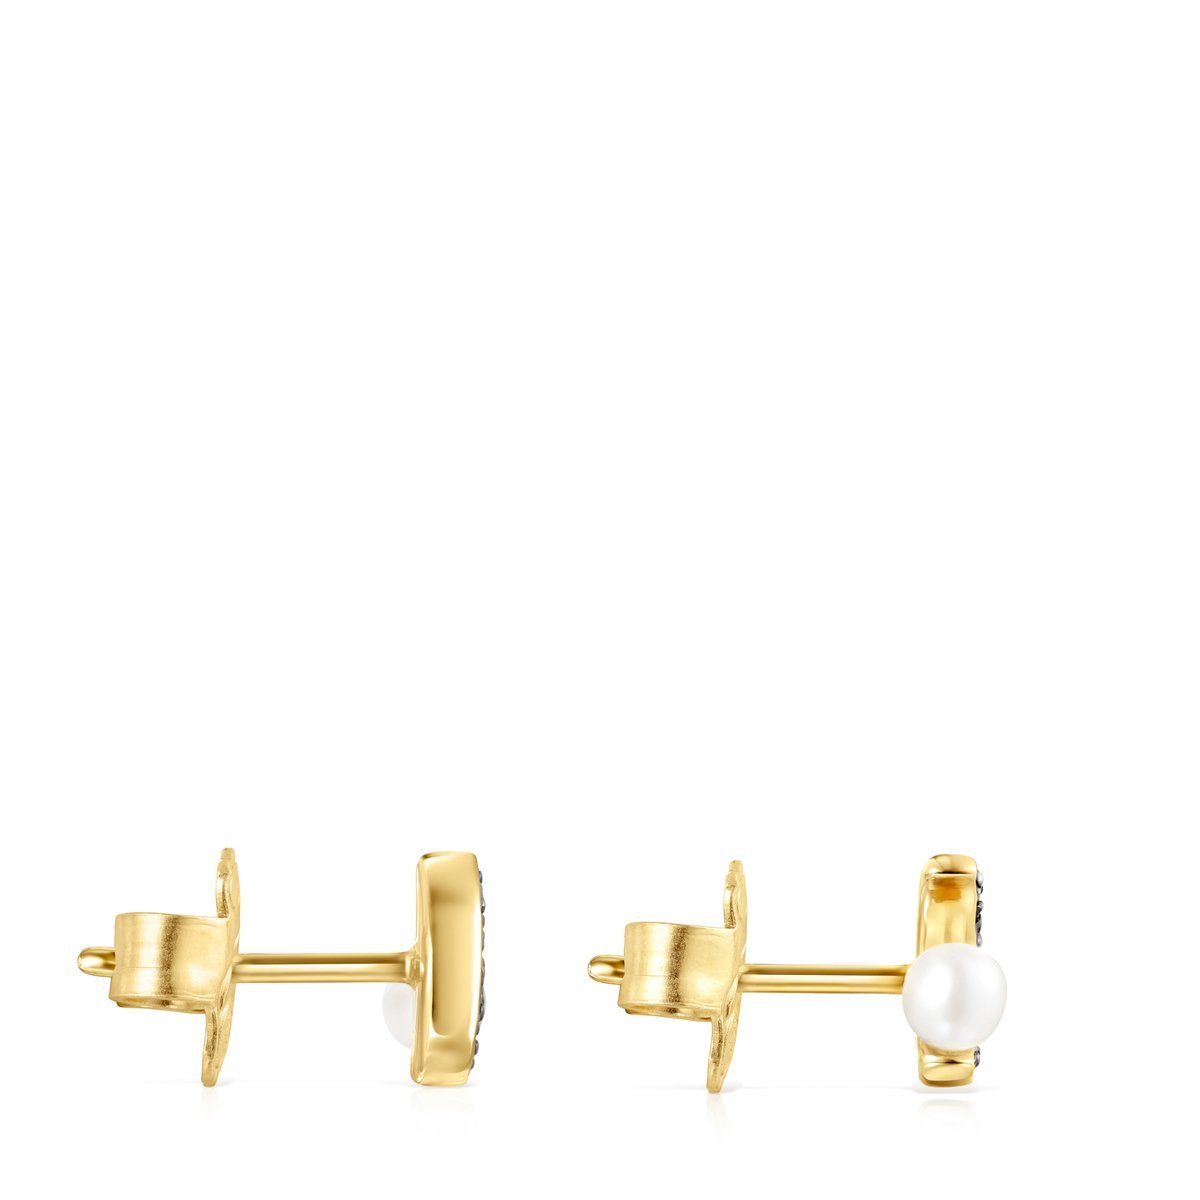 Tous Nocturne half-moon Earrings in Gold Vermeil with Diamonds and Pearl 918443800